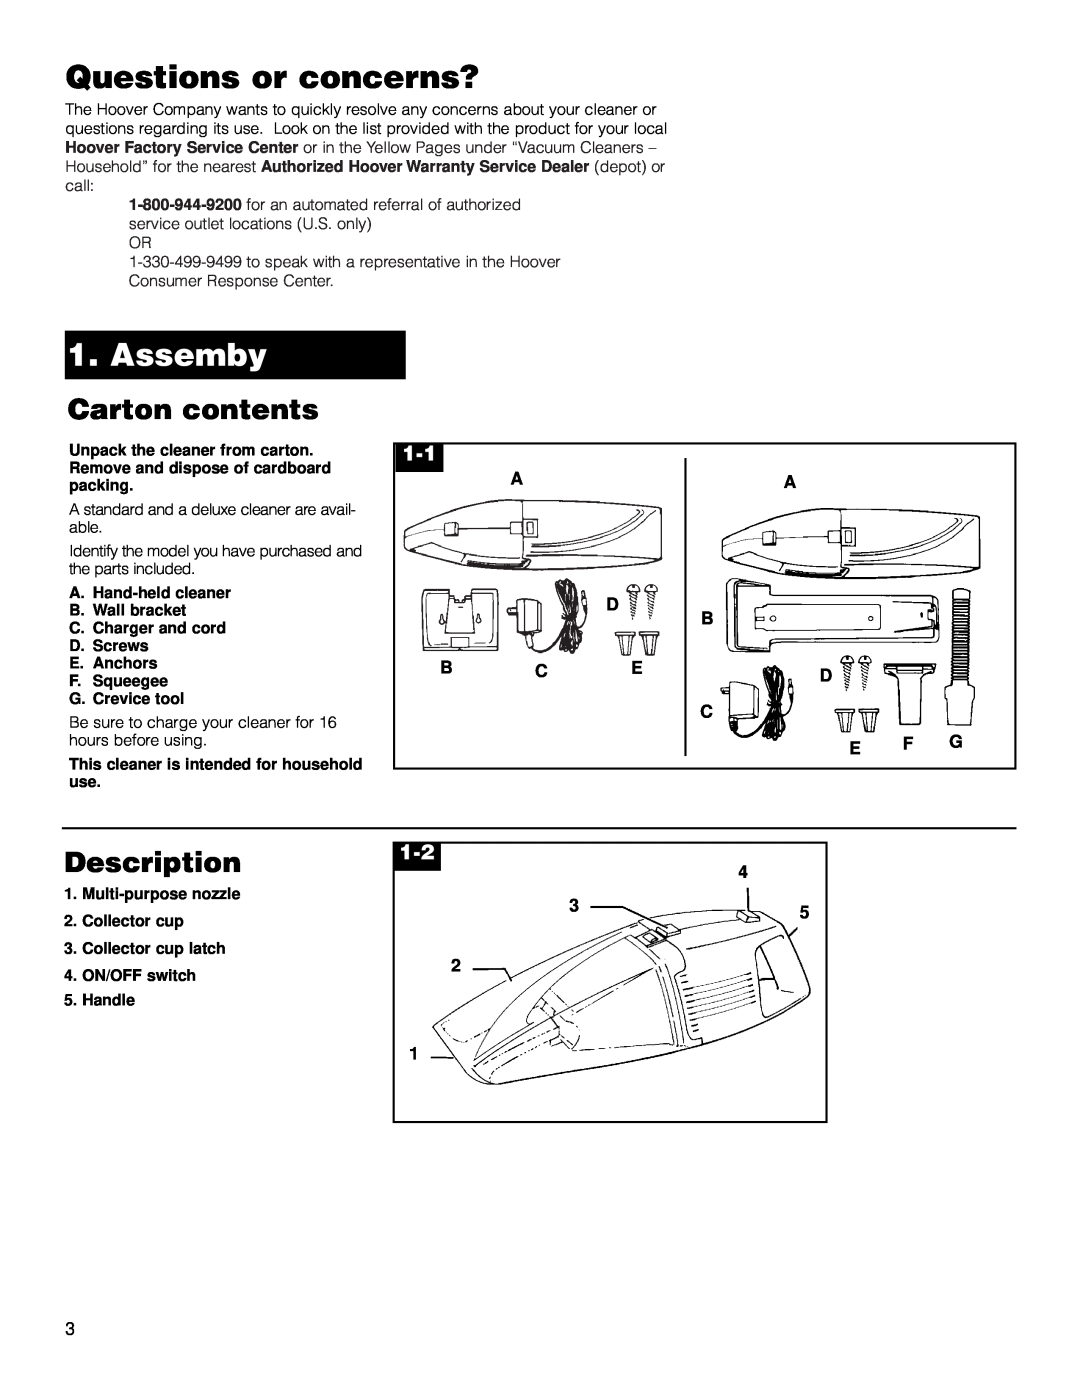 Hoover Dubl-Duty owner manual Questions or concerns?, Assemby, Carton contents, Description 